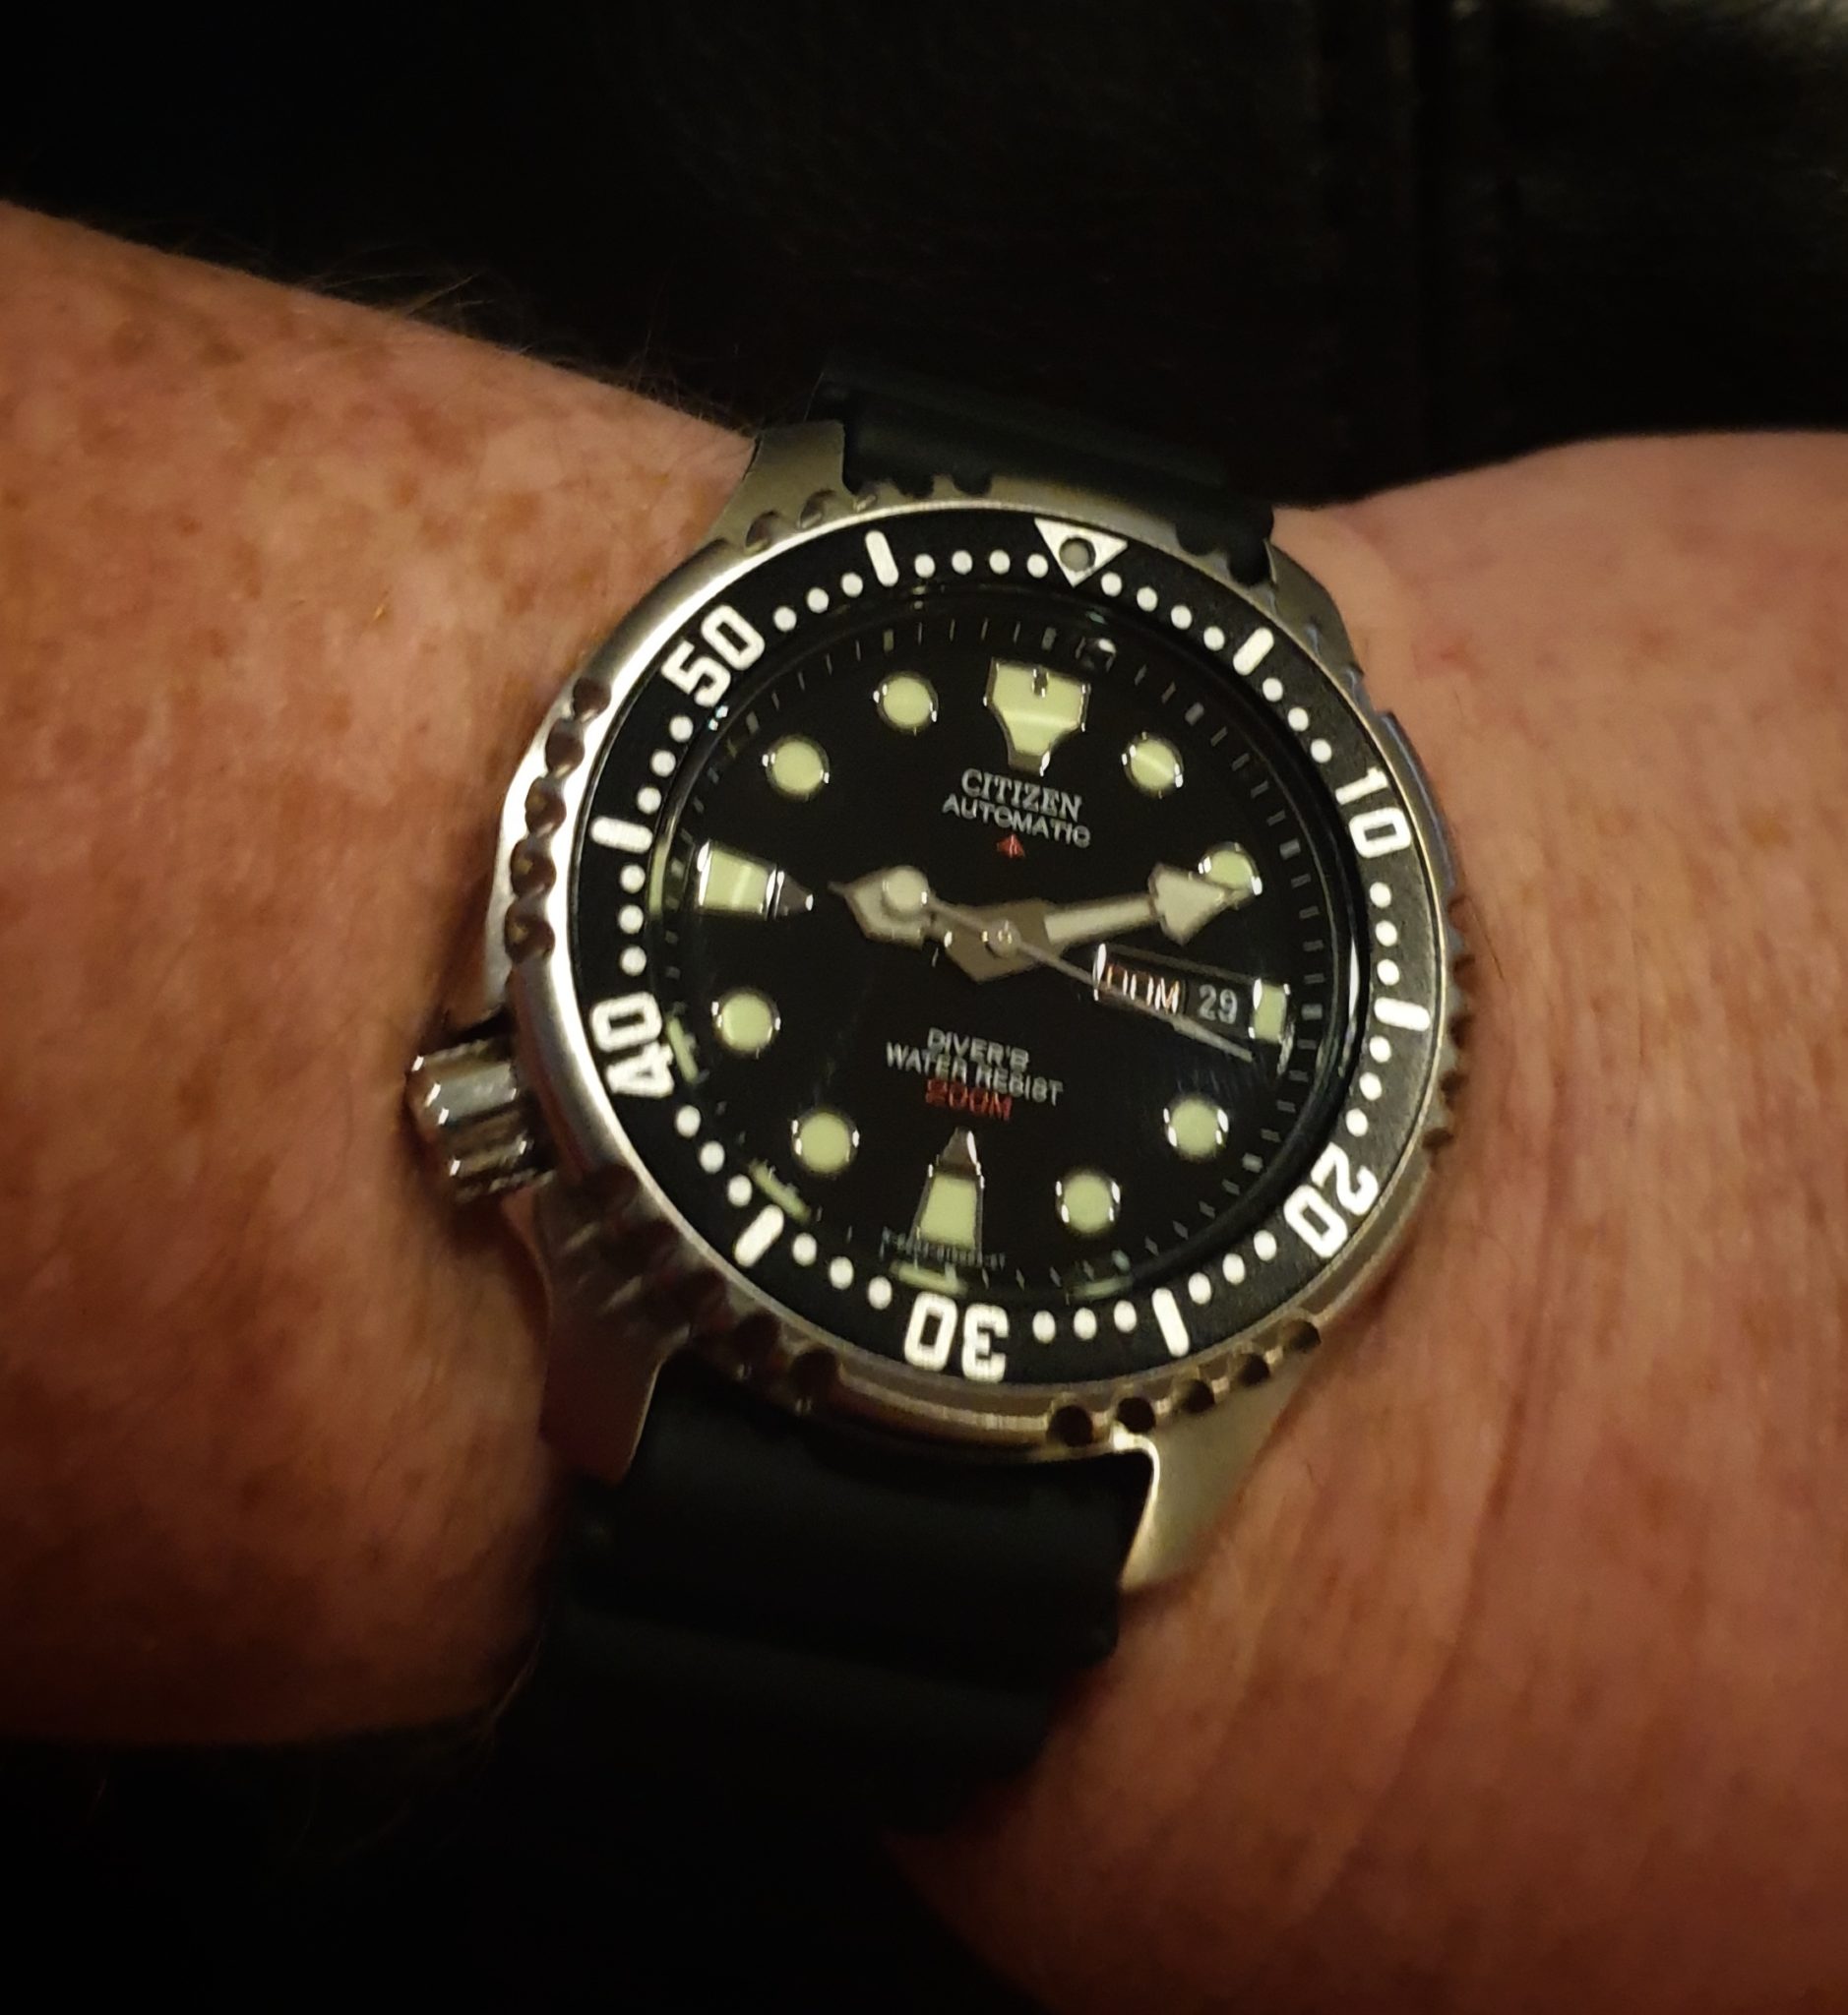 Owner Review: Citizen Promaster Diver NY0040-41e - FIFTH WRIST